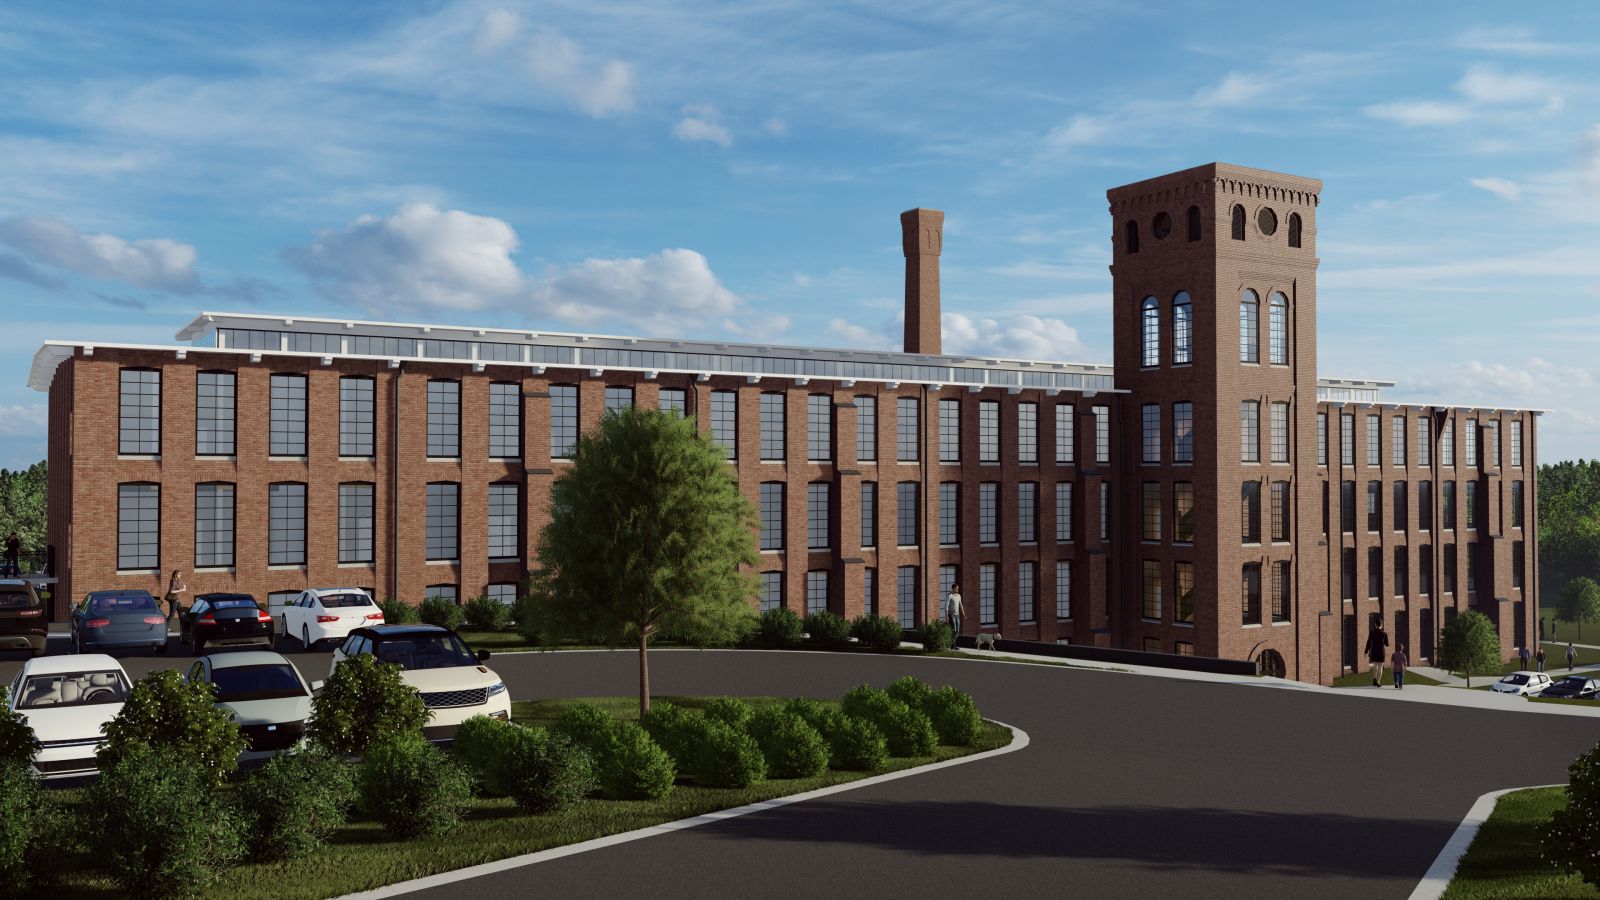 Renderings for the Newry Mill's $60 million-multi-family development feature 197 apartments in the old factory building and in a new neighboring complex. (Photo/Provided)